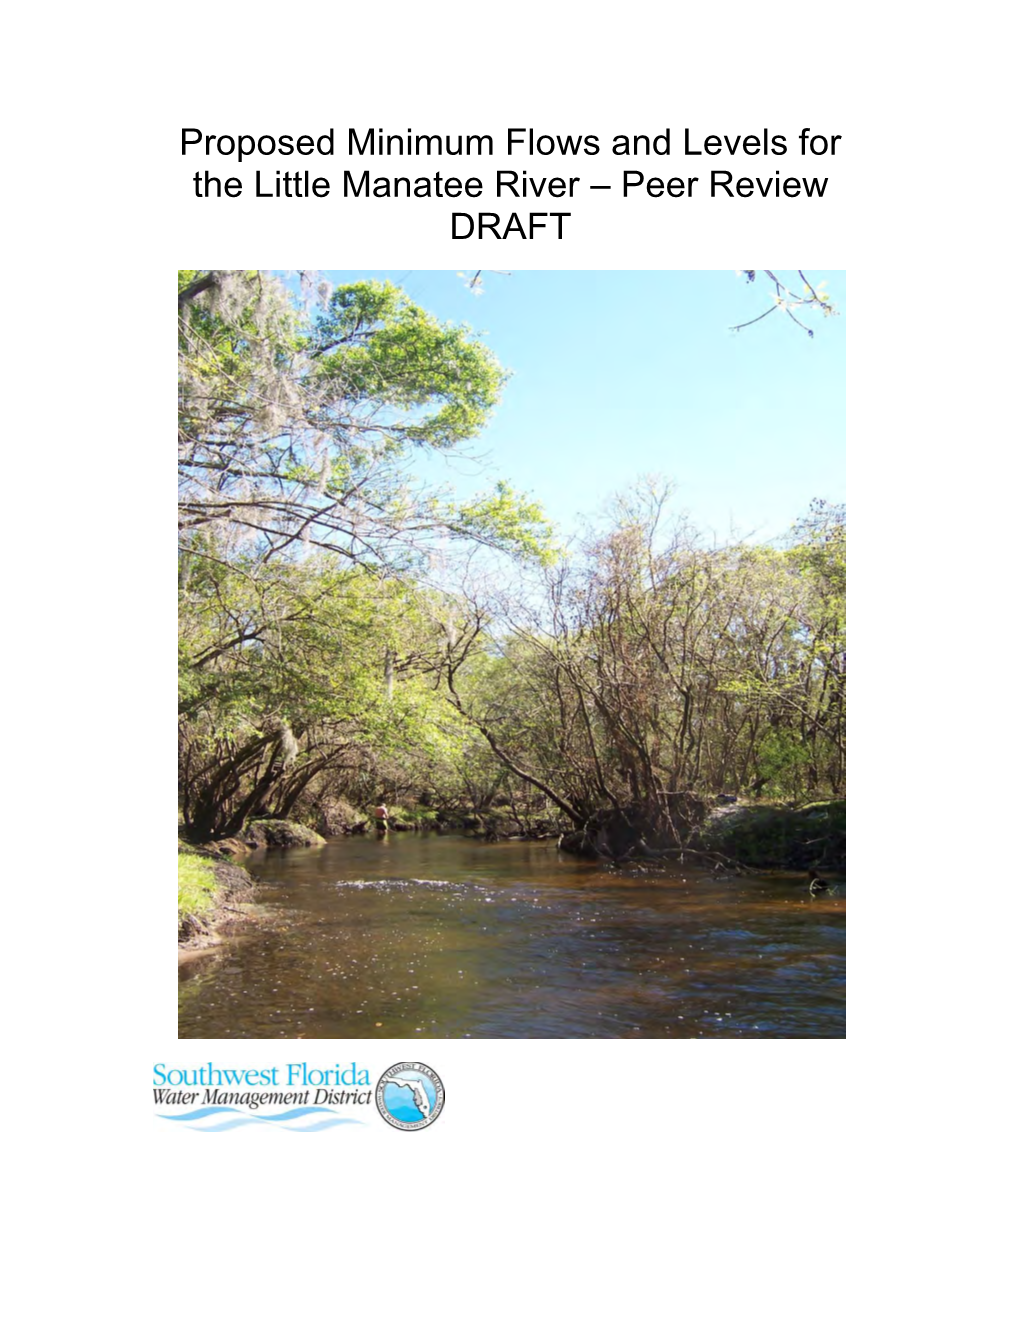 Proposed Minimum Flows and Levels for the Little Manatee River – Peer Review DRAFT